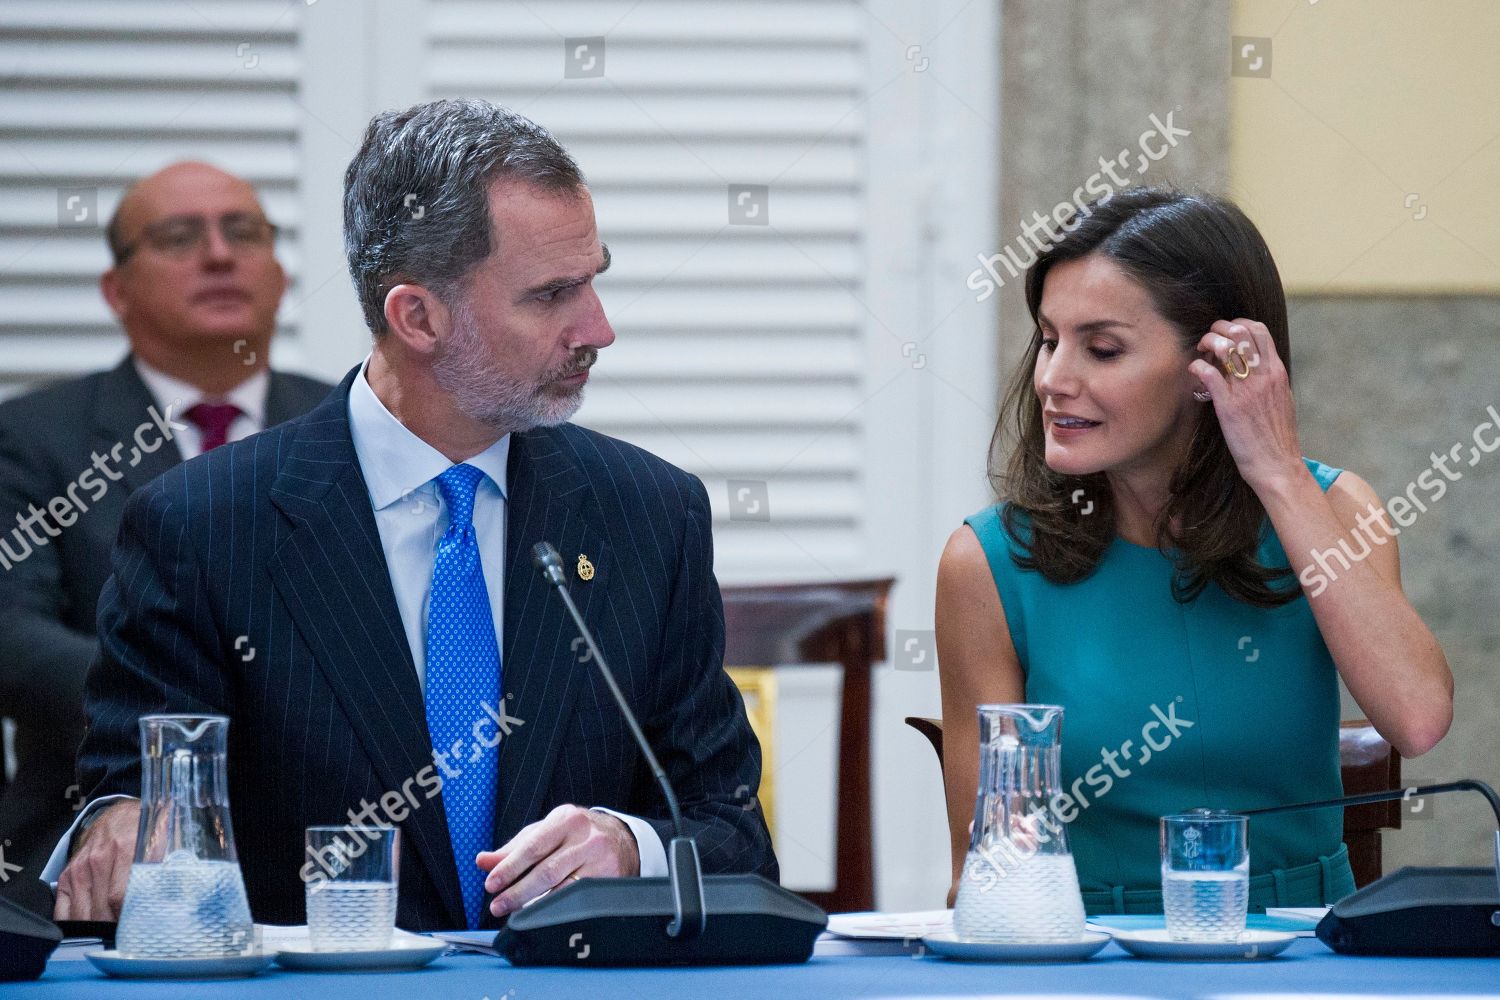 meeting-of-members-of-the-patronages-of-the-princess-of-asturias-foundation-madrid-spain-shutterstock-editorial-10322269ay.jpg